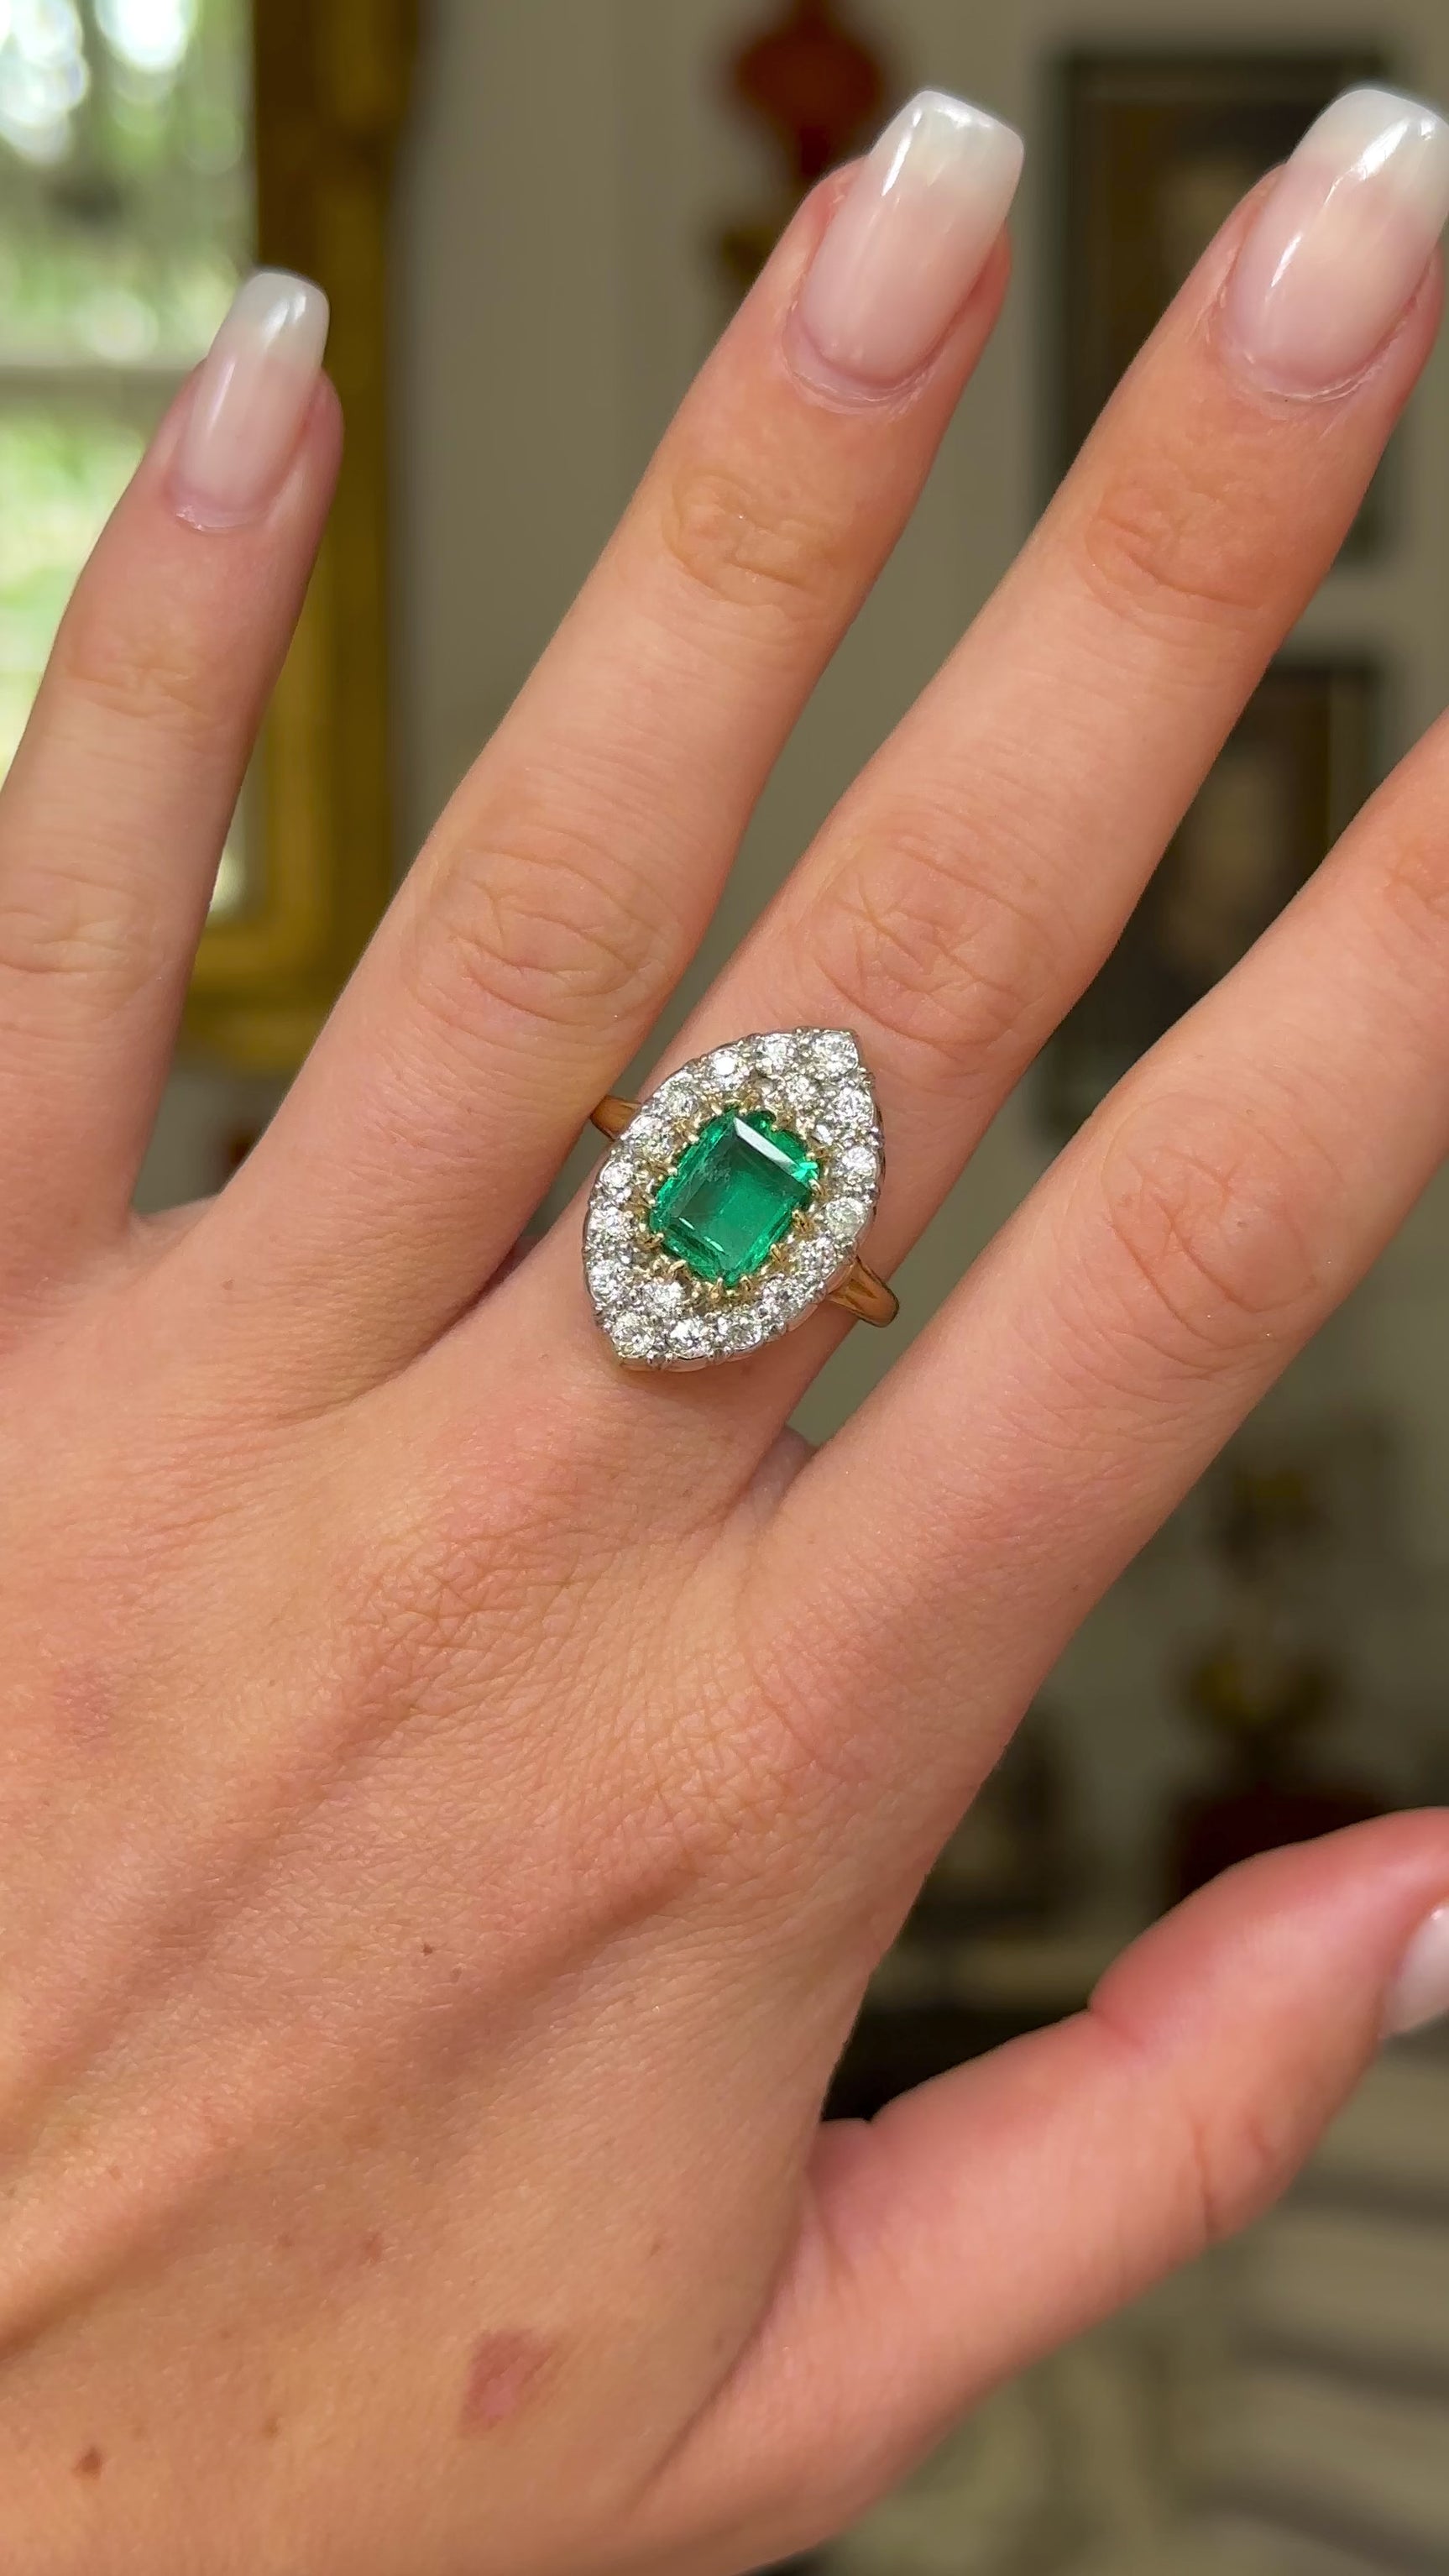 Emerald and diamond navette ring, worn on hand and rotated to give perspective.